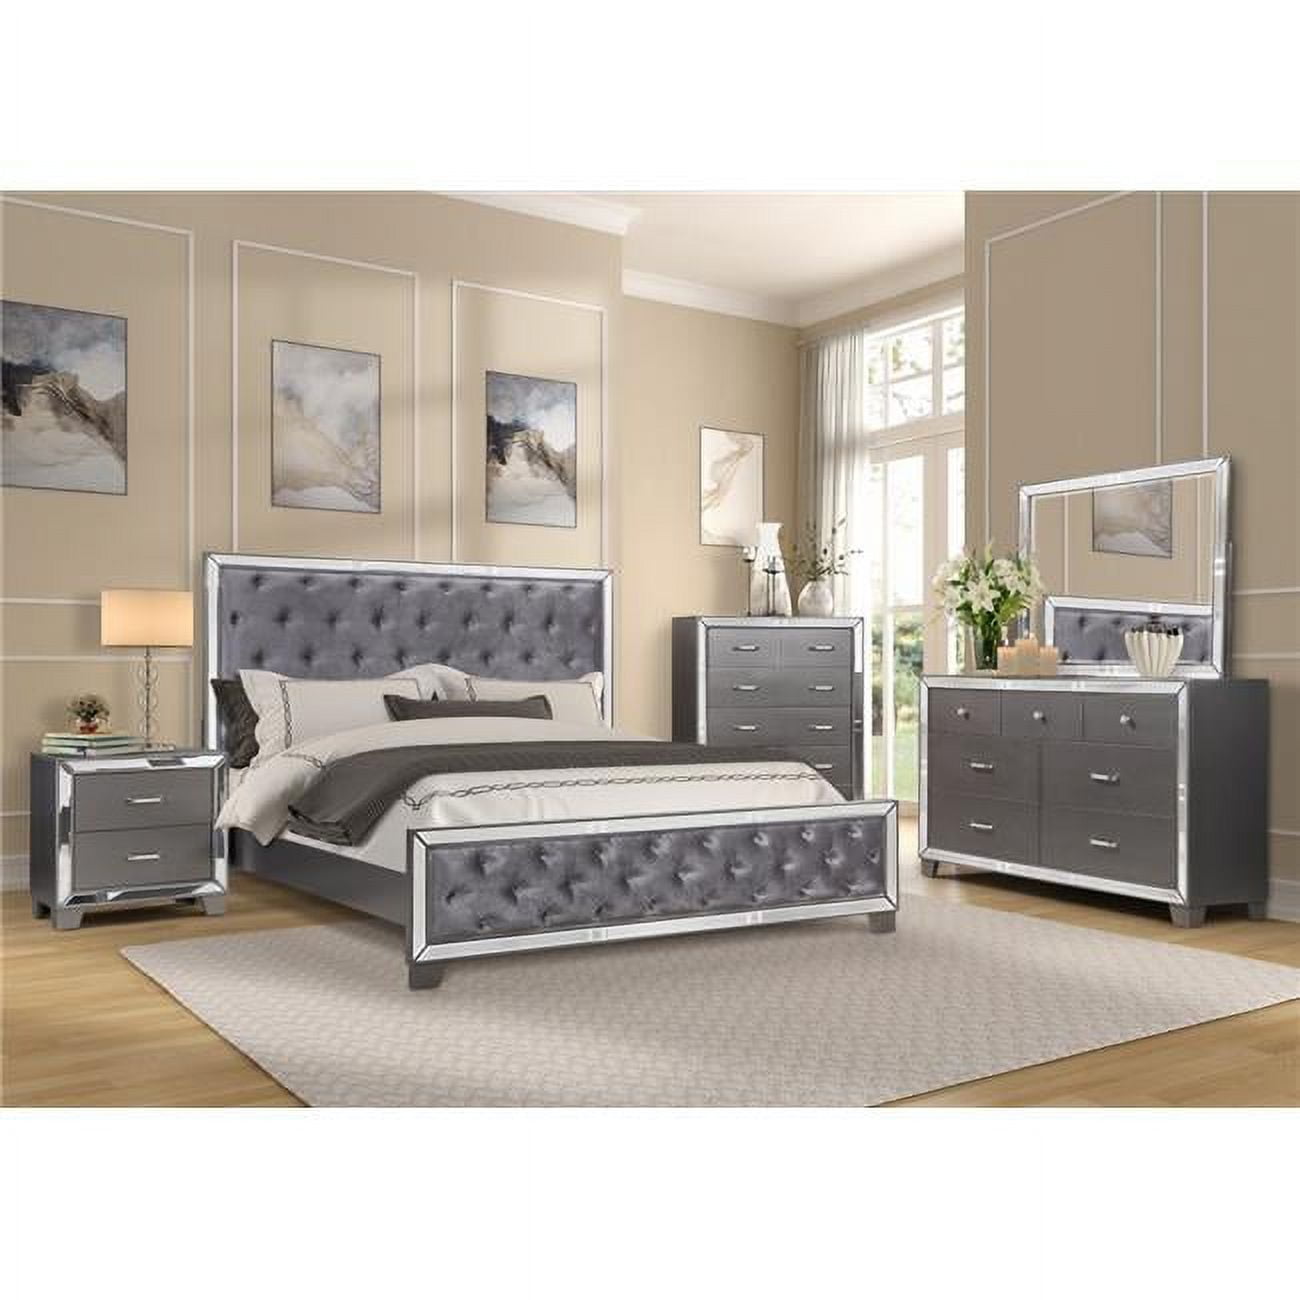 Picture of Best Master Furniture B1004 5PC Eastern King Set Beronica Tufted Dark Grey Mirrored King Size Set, Sedona Silver - 5 Piece